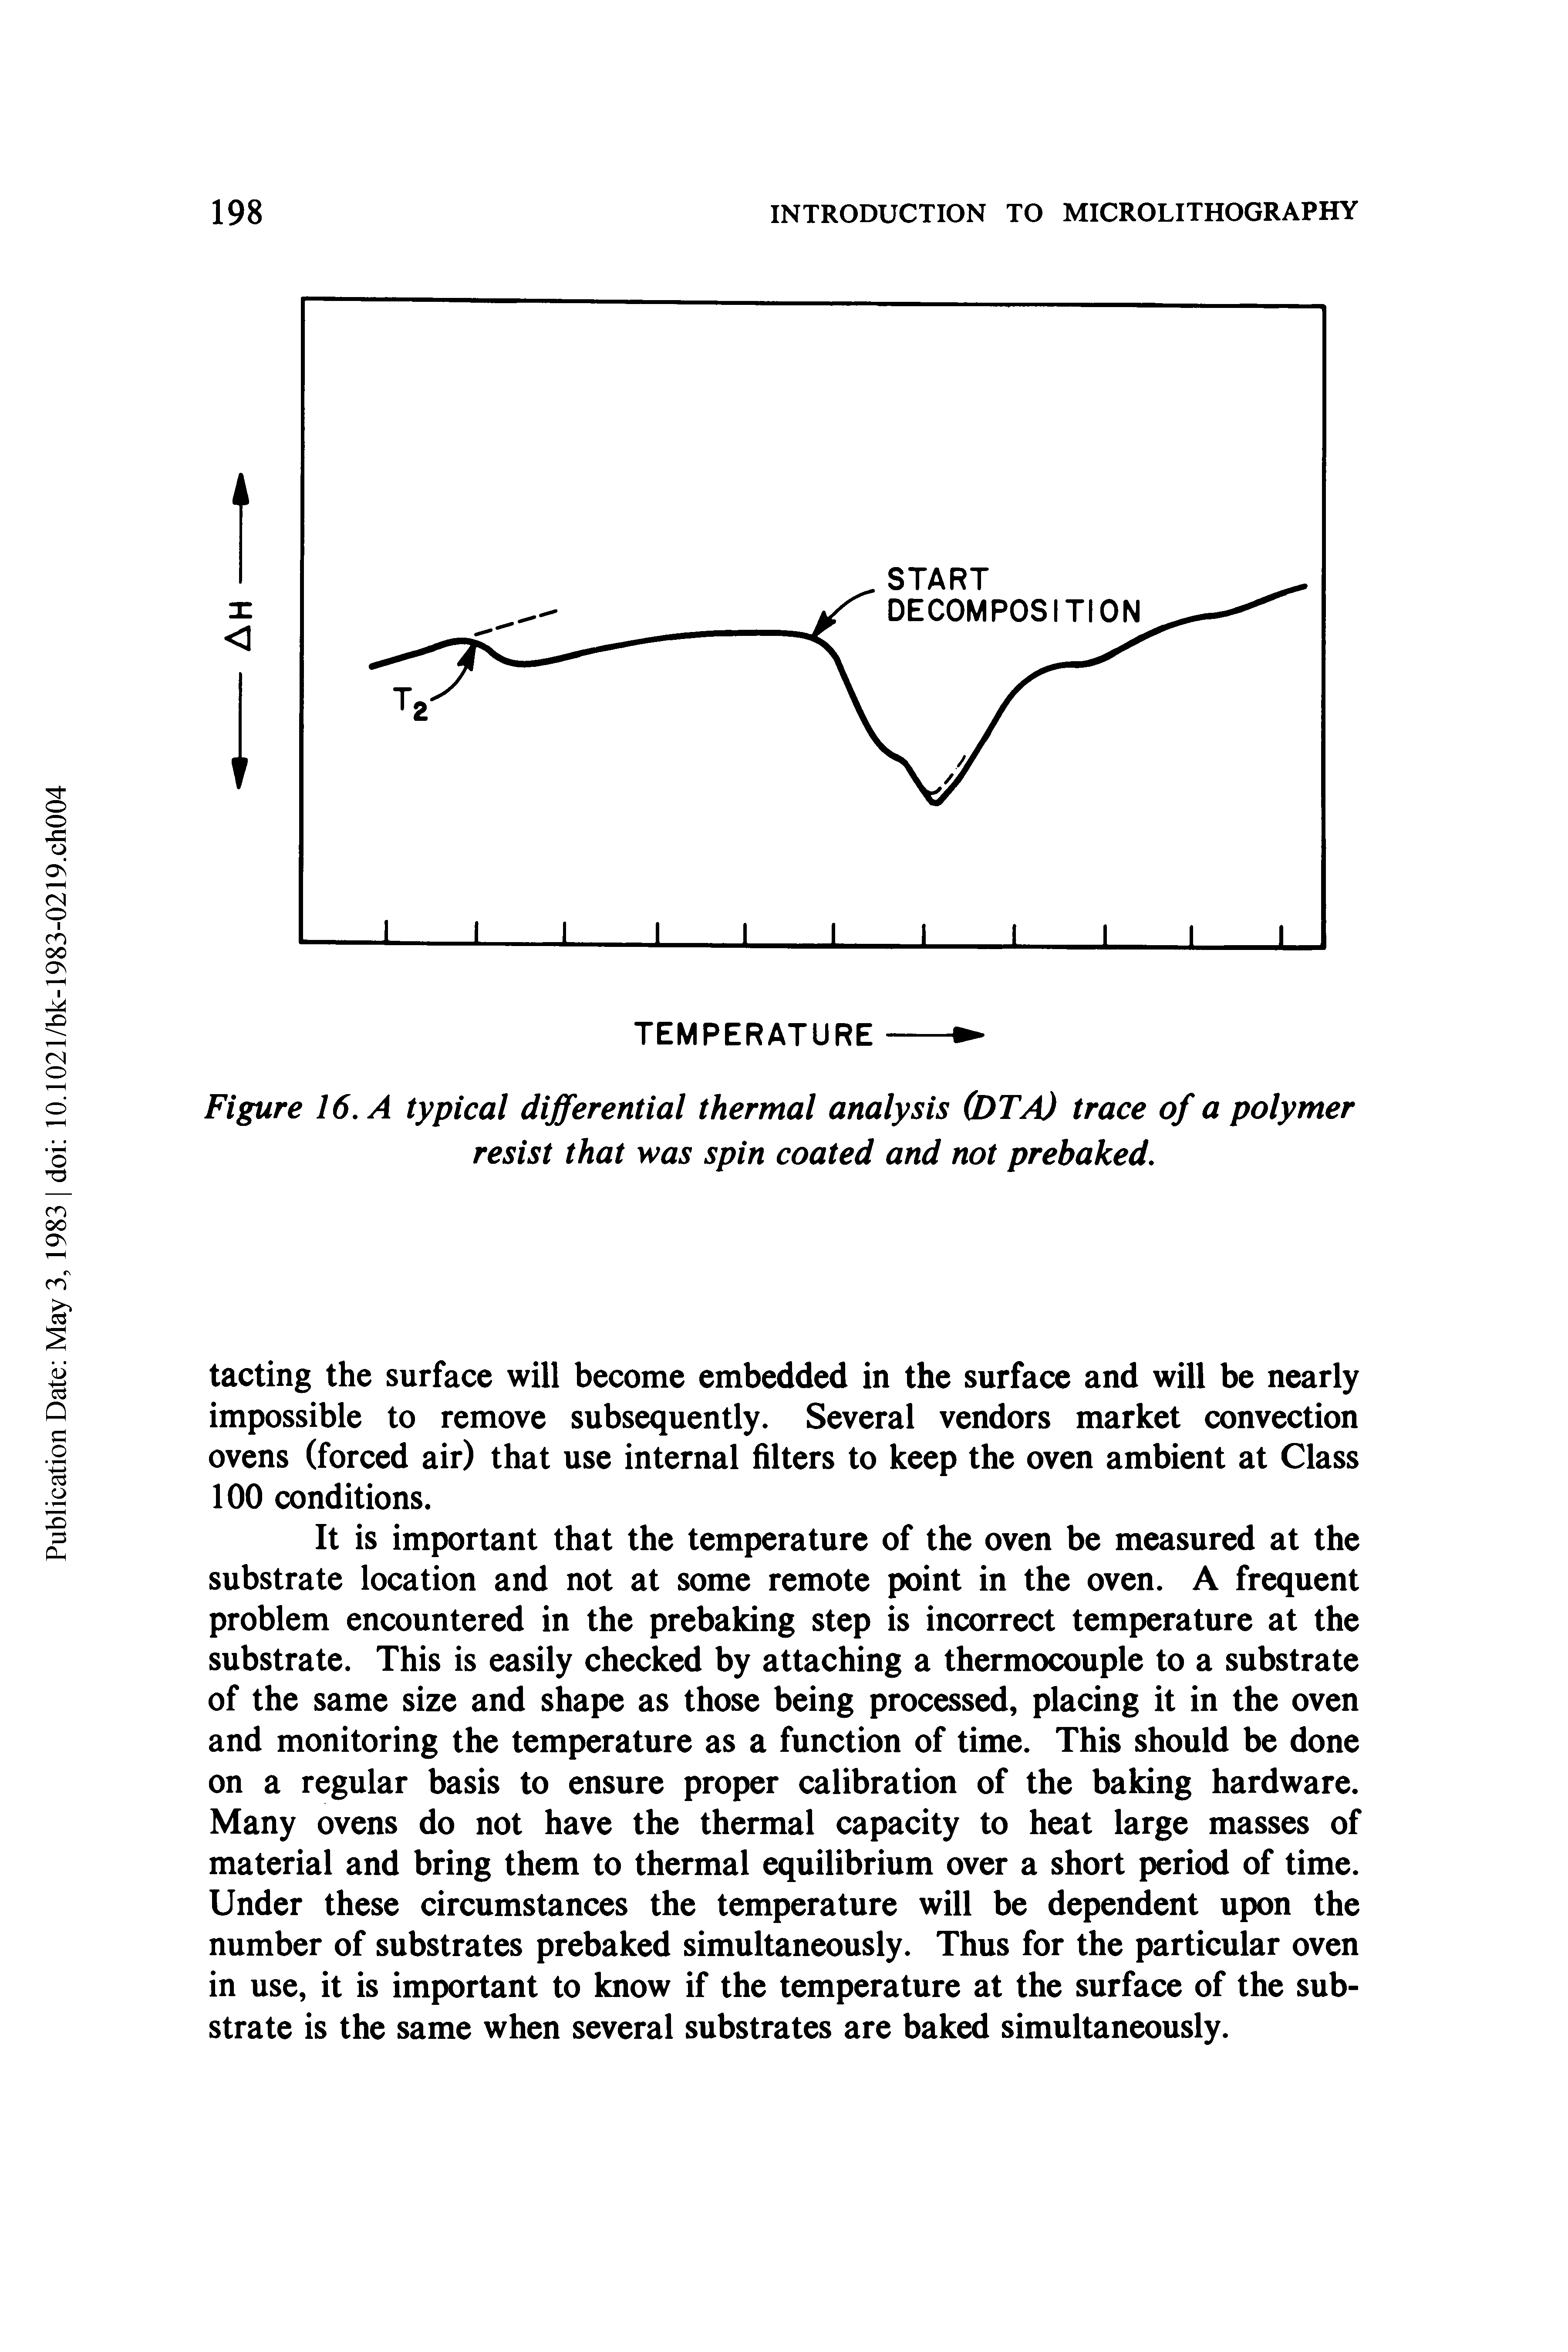 Figure 16. A typical differential thermal analysis (DTA) trace of a polymer resist that was spin coated and not prebaked.